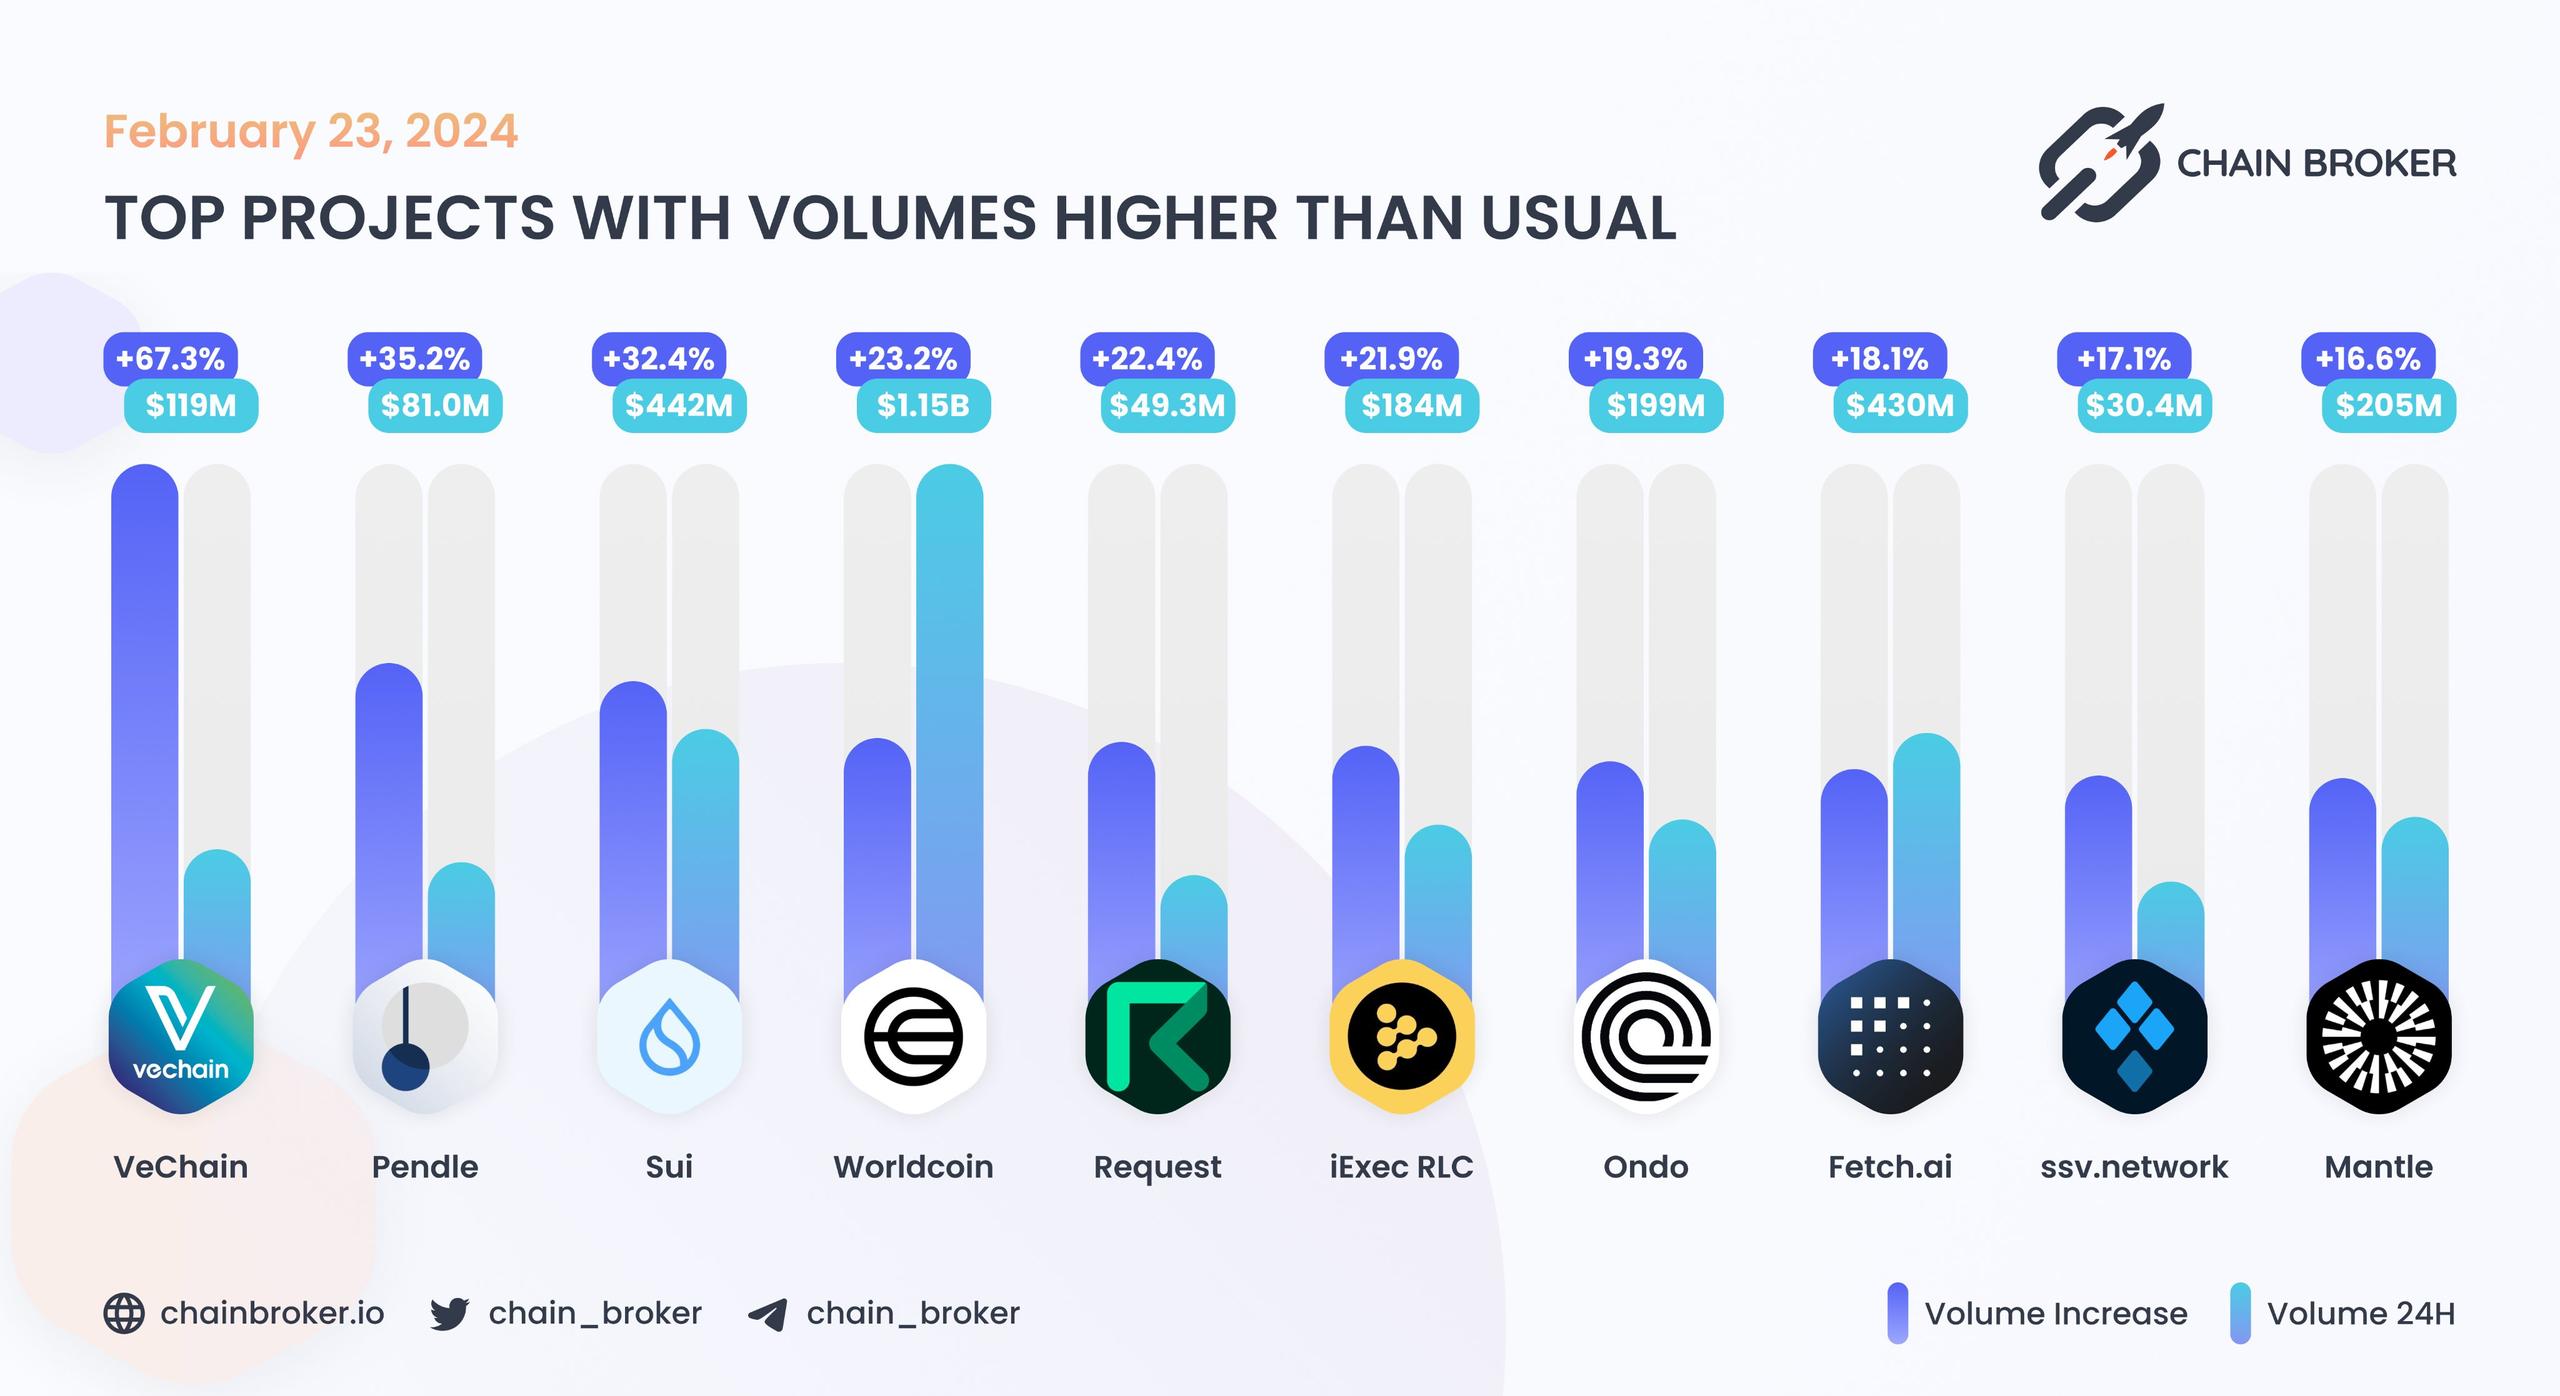 Top projects with volumes higher than usual